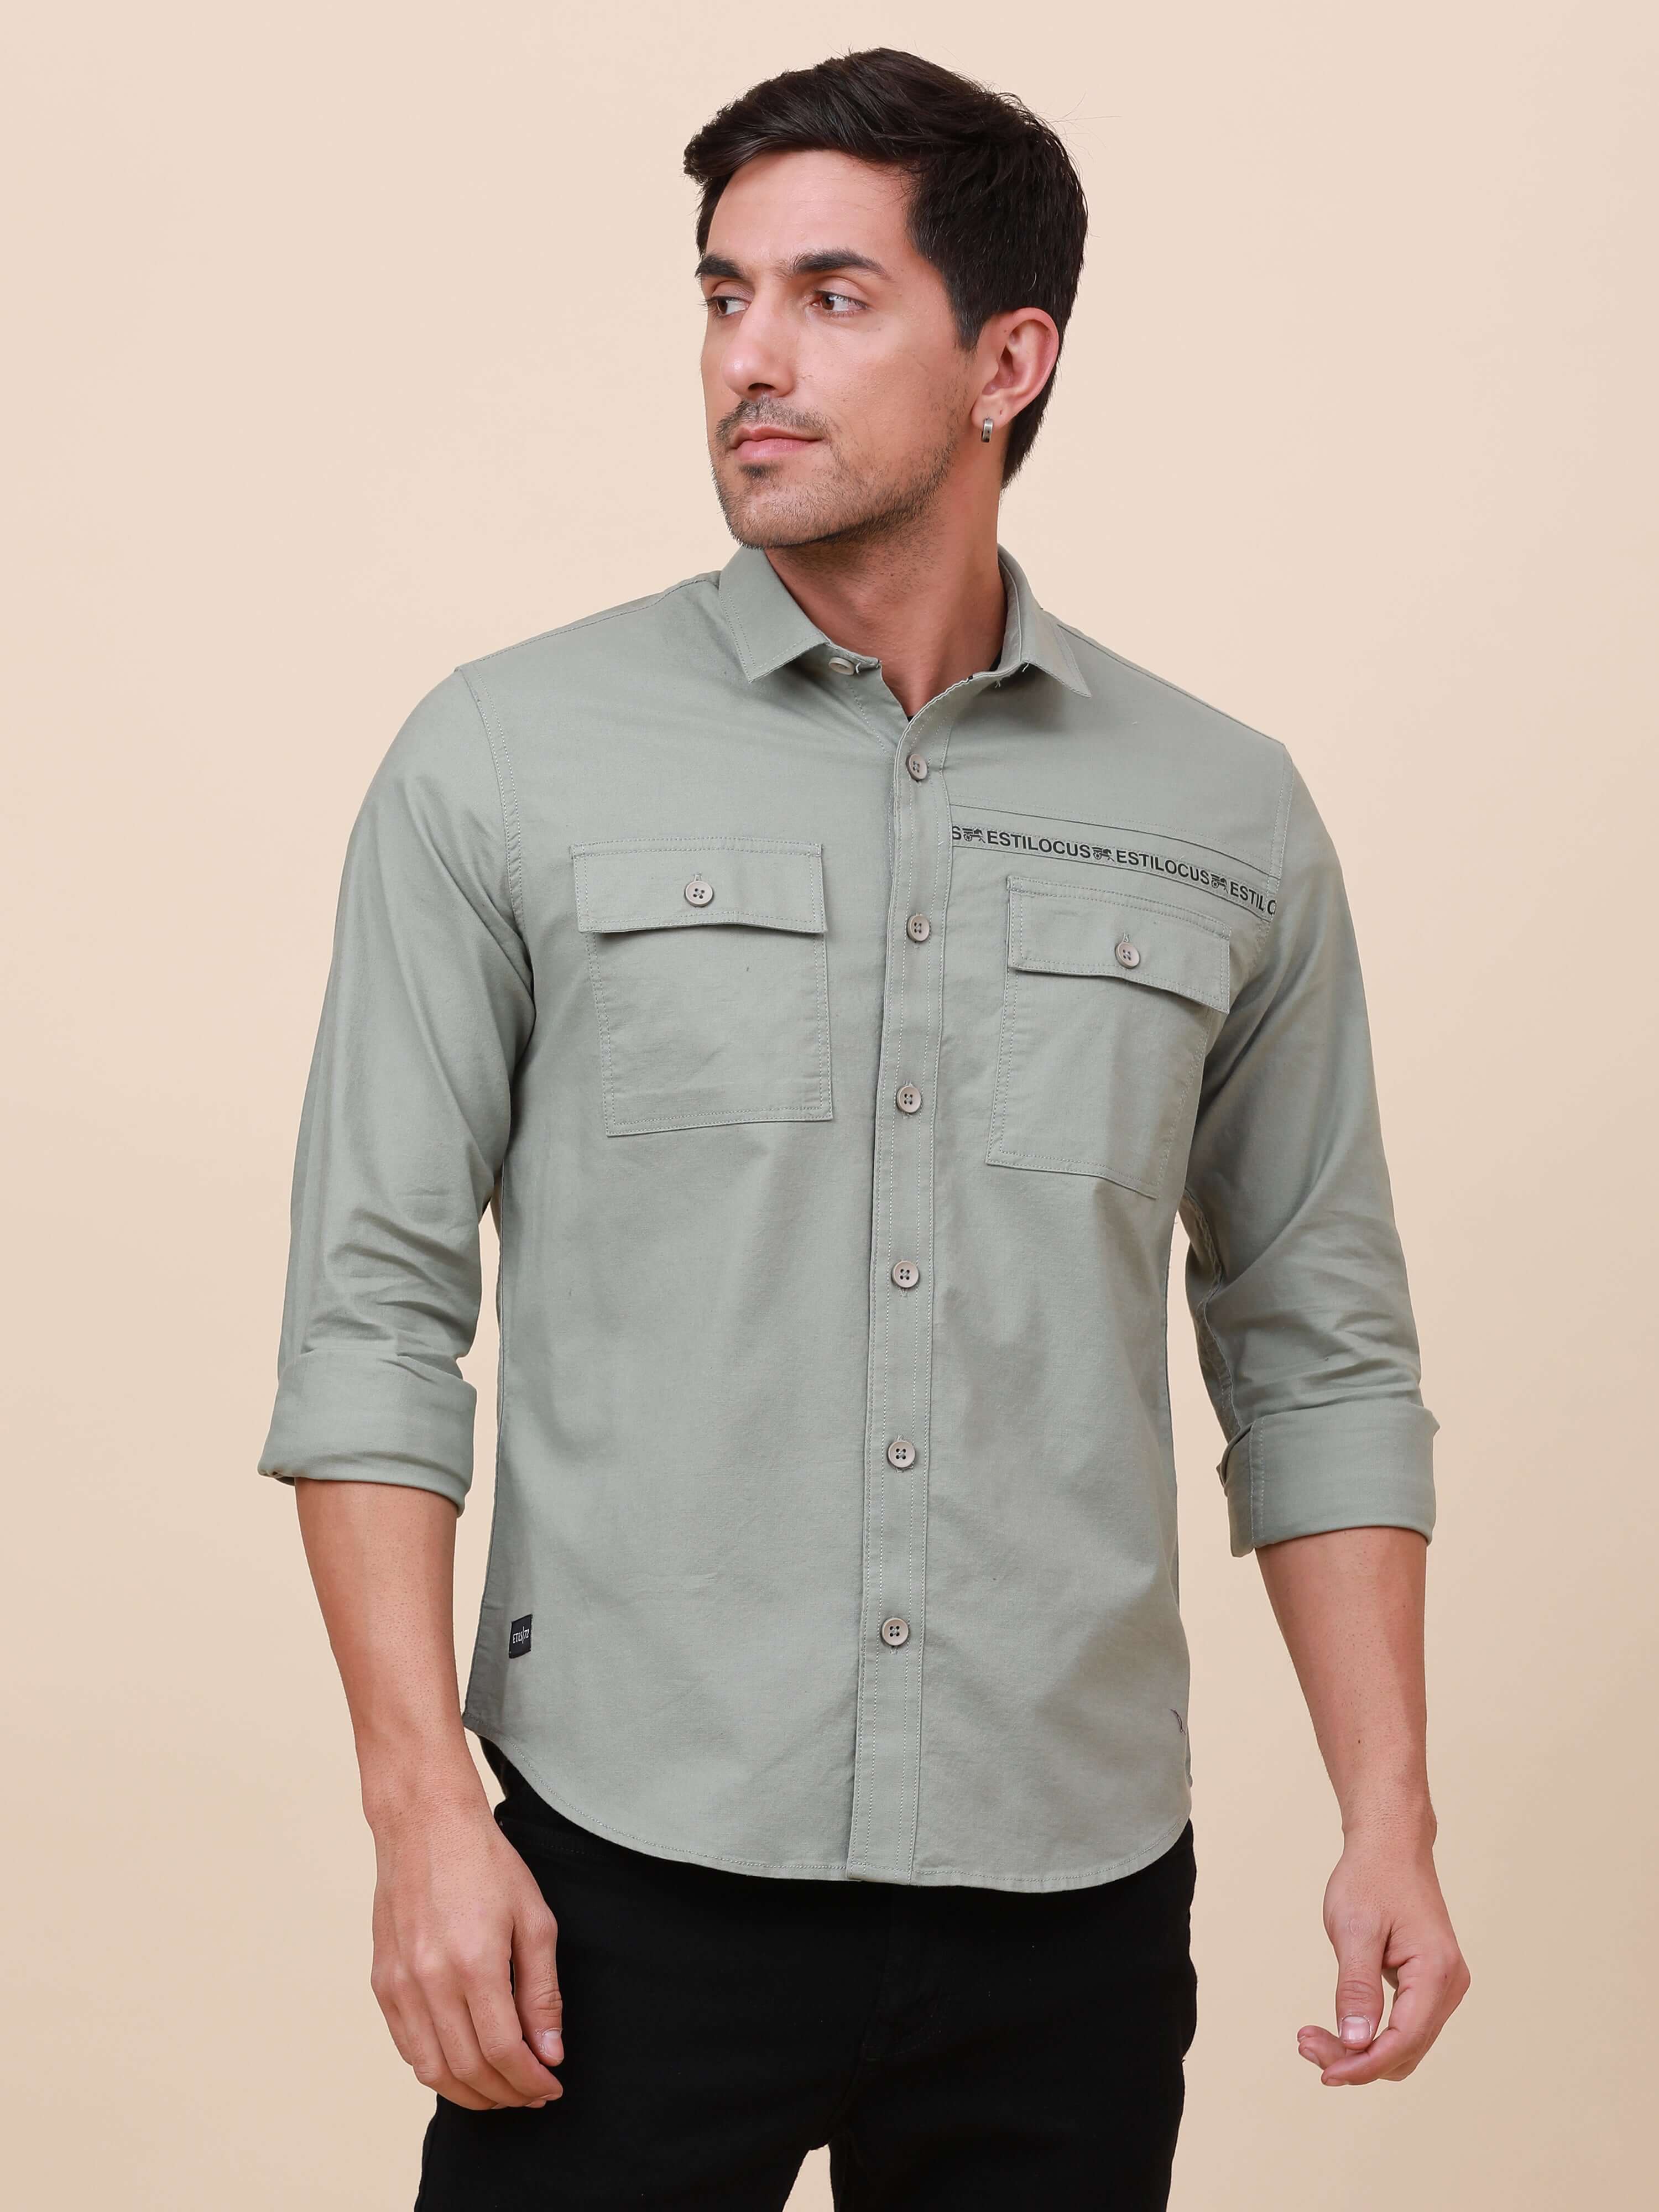 Olive Solid Double Pocket Shirt shop online at Estilocus. 100% Cotton , Full-sleeve solid shirt Cut and sew placket Regular collar Double button edge cuff Double pocket with flap Curved bottom hemline Finest printing at front placket. All double needle co